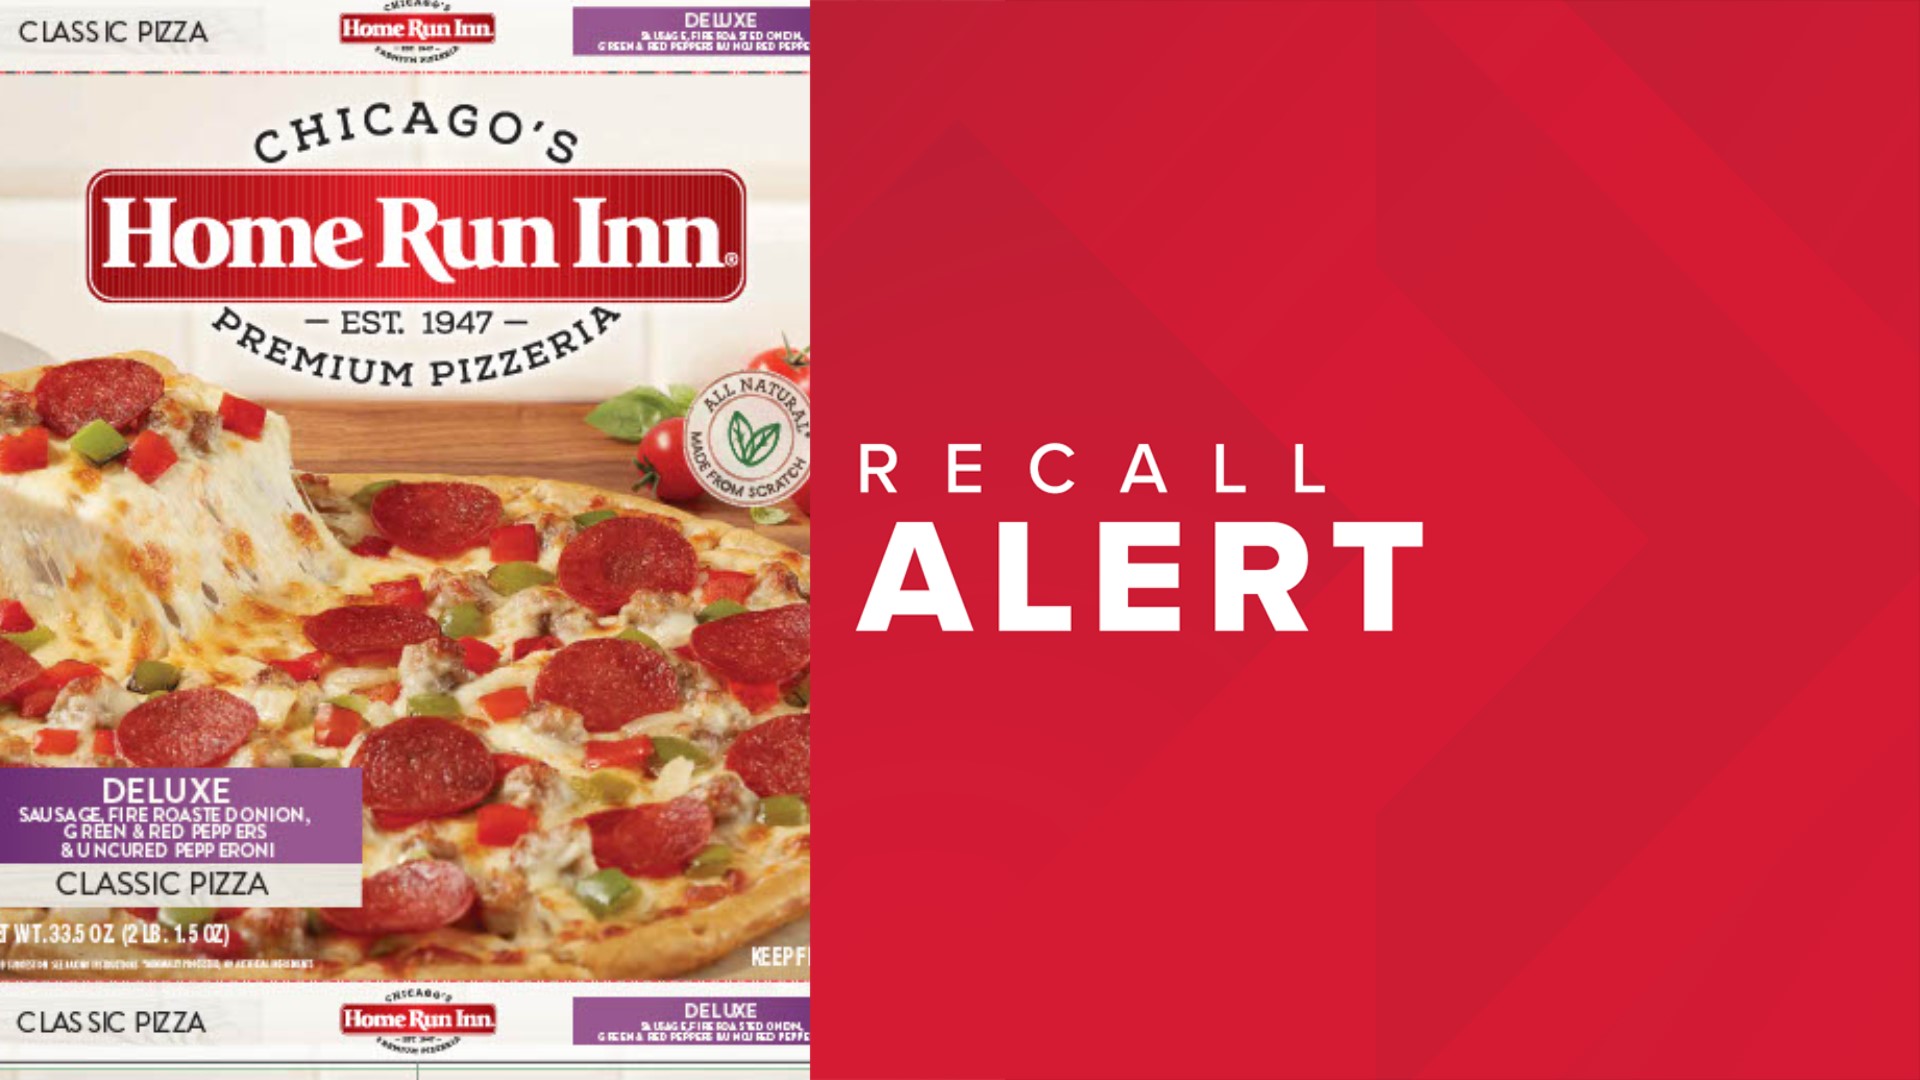 Home Run Inn's "Deluxe Sausage Classic Pizza" is being recalled for possibly containing possible metal pieces.